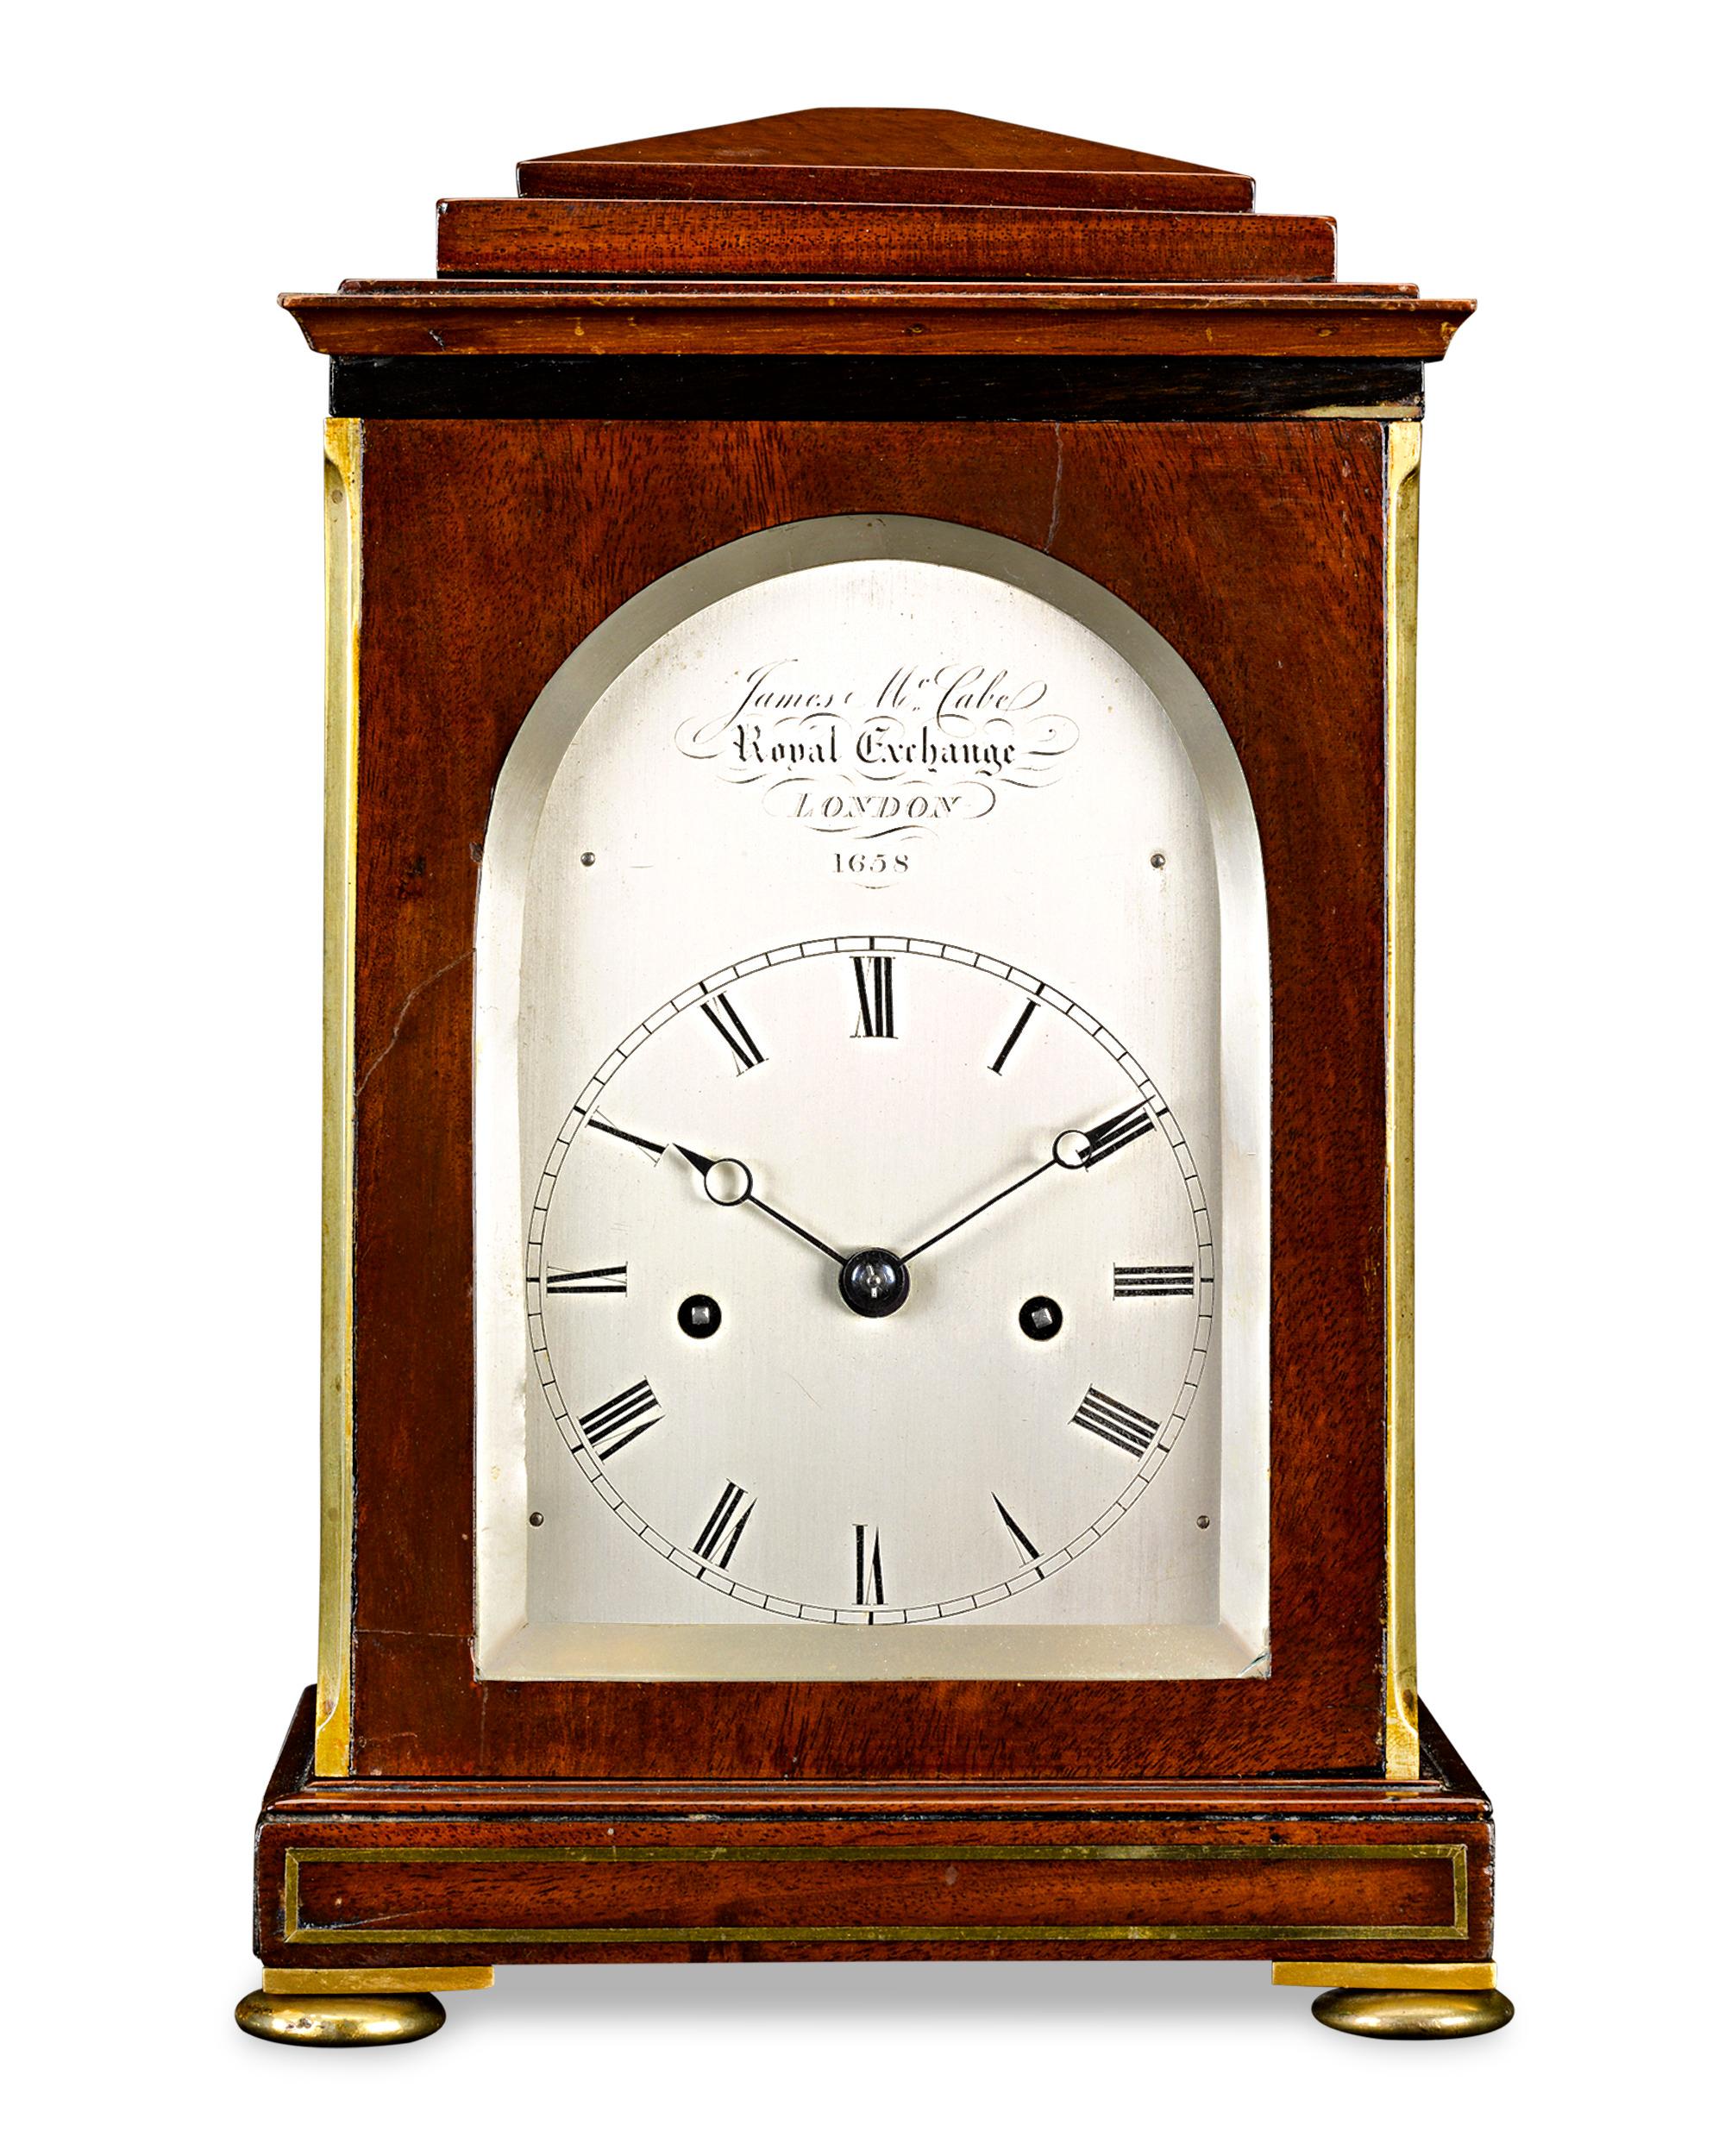 This solid mahogany traveling clock with balance wheel escapement was crafted by celebrated London clockmaker James McCabe for London’s Royal Exchange. Known for exquisite workmanship and precision, McCabe timepieces were owned by notable figures,